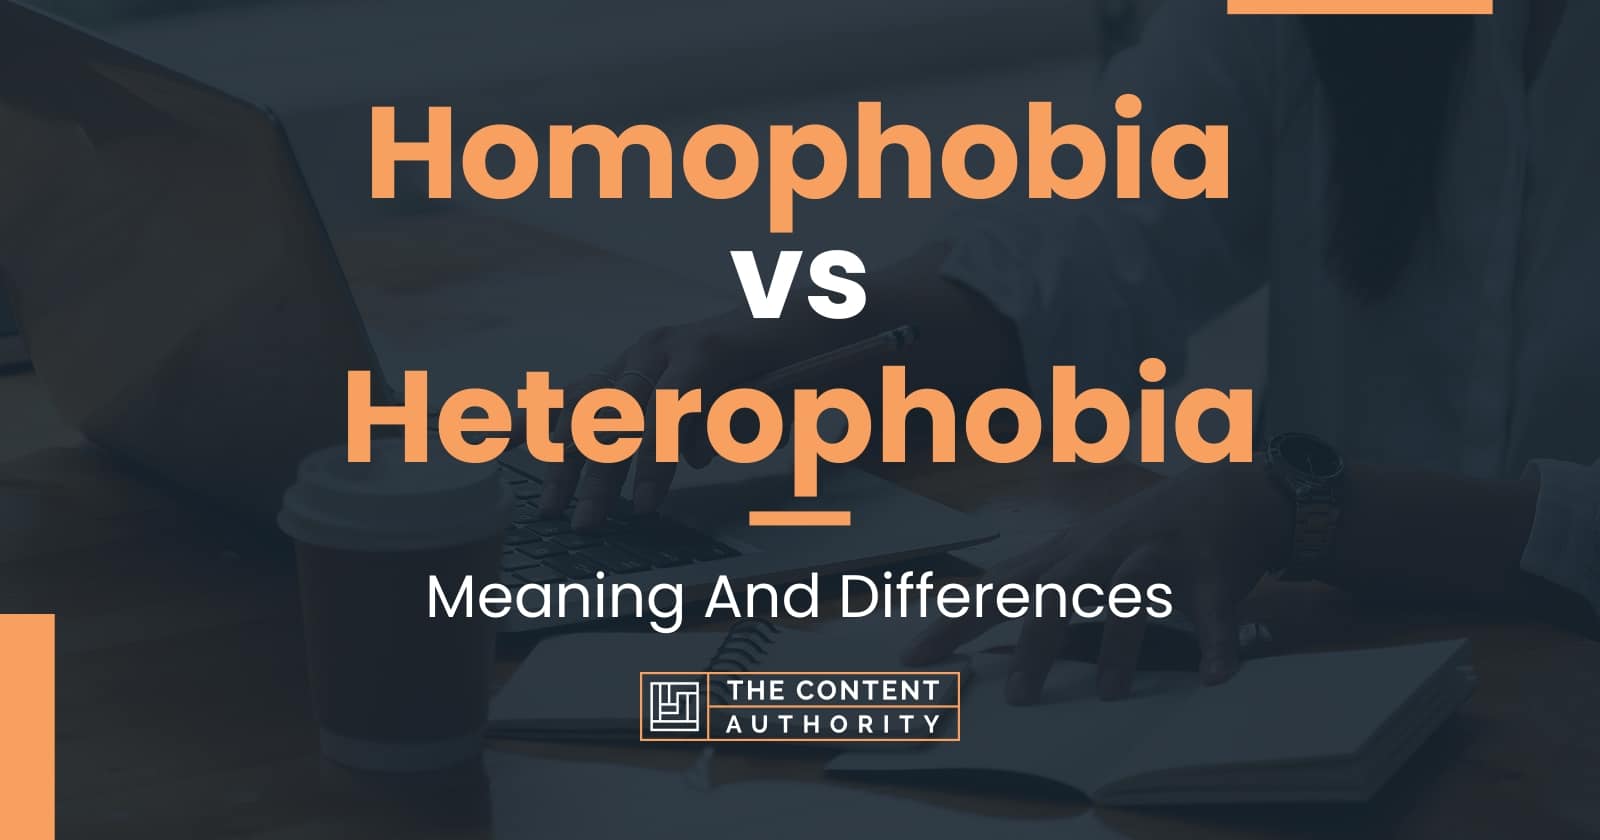 Homophobia vs Heterophobia: Meaning And Differences